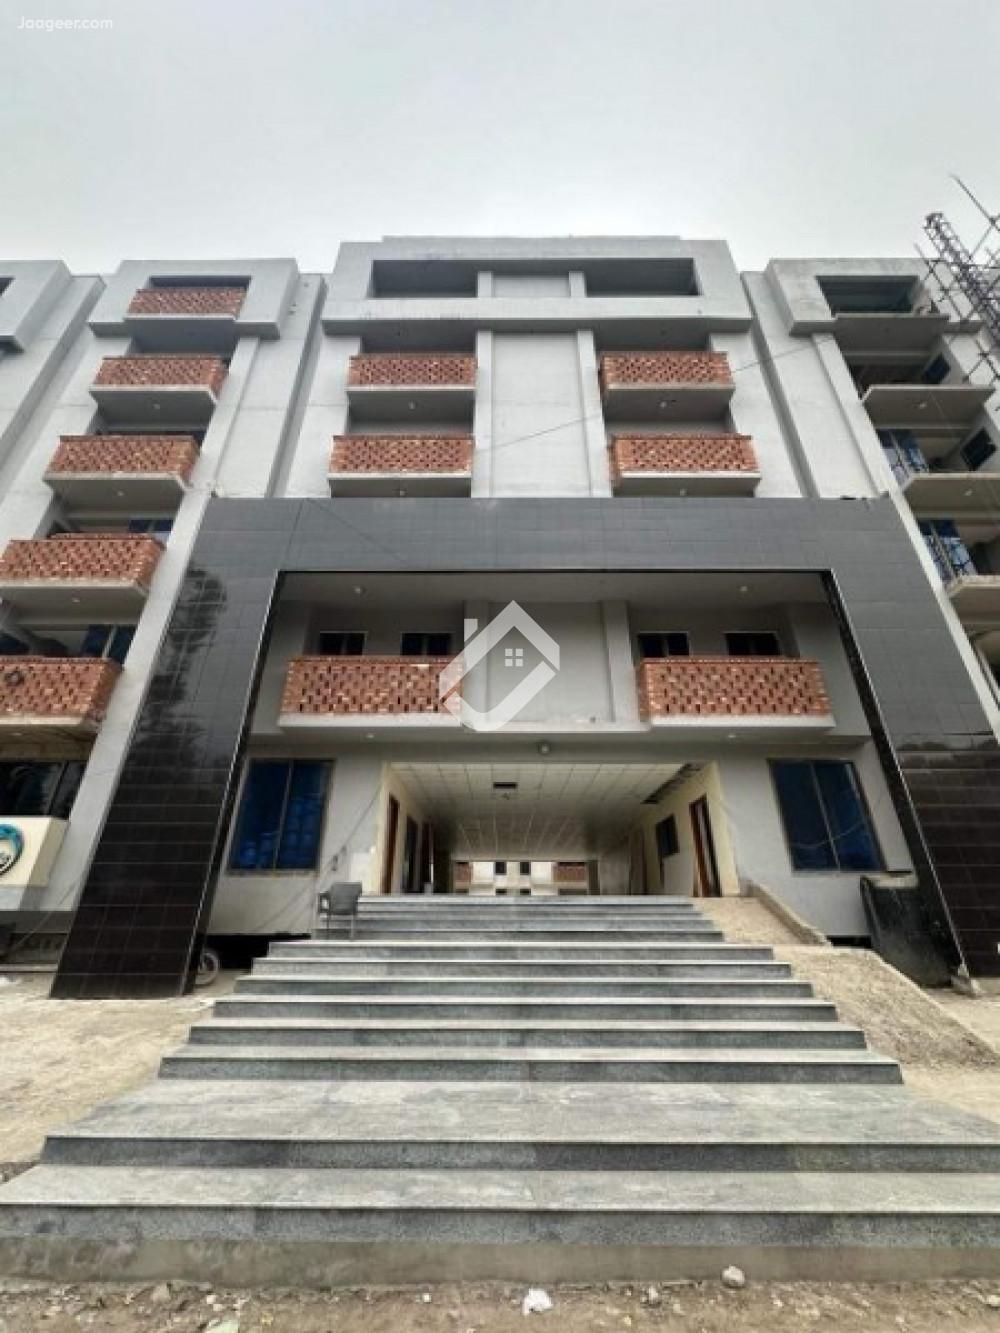 View  3 BHK Apartment For Sale In Al-Rehman Heights in Al-Rehman Heights, Sargodha